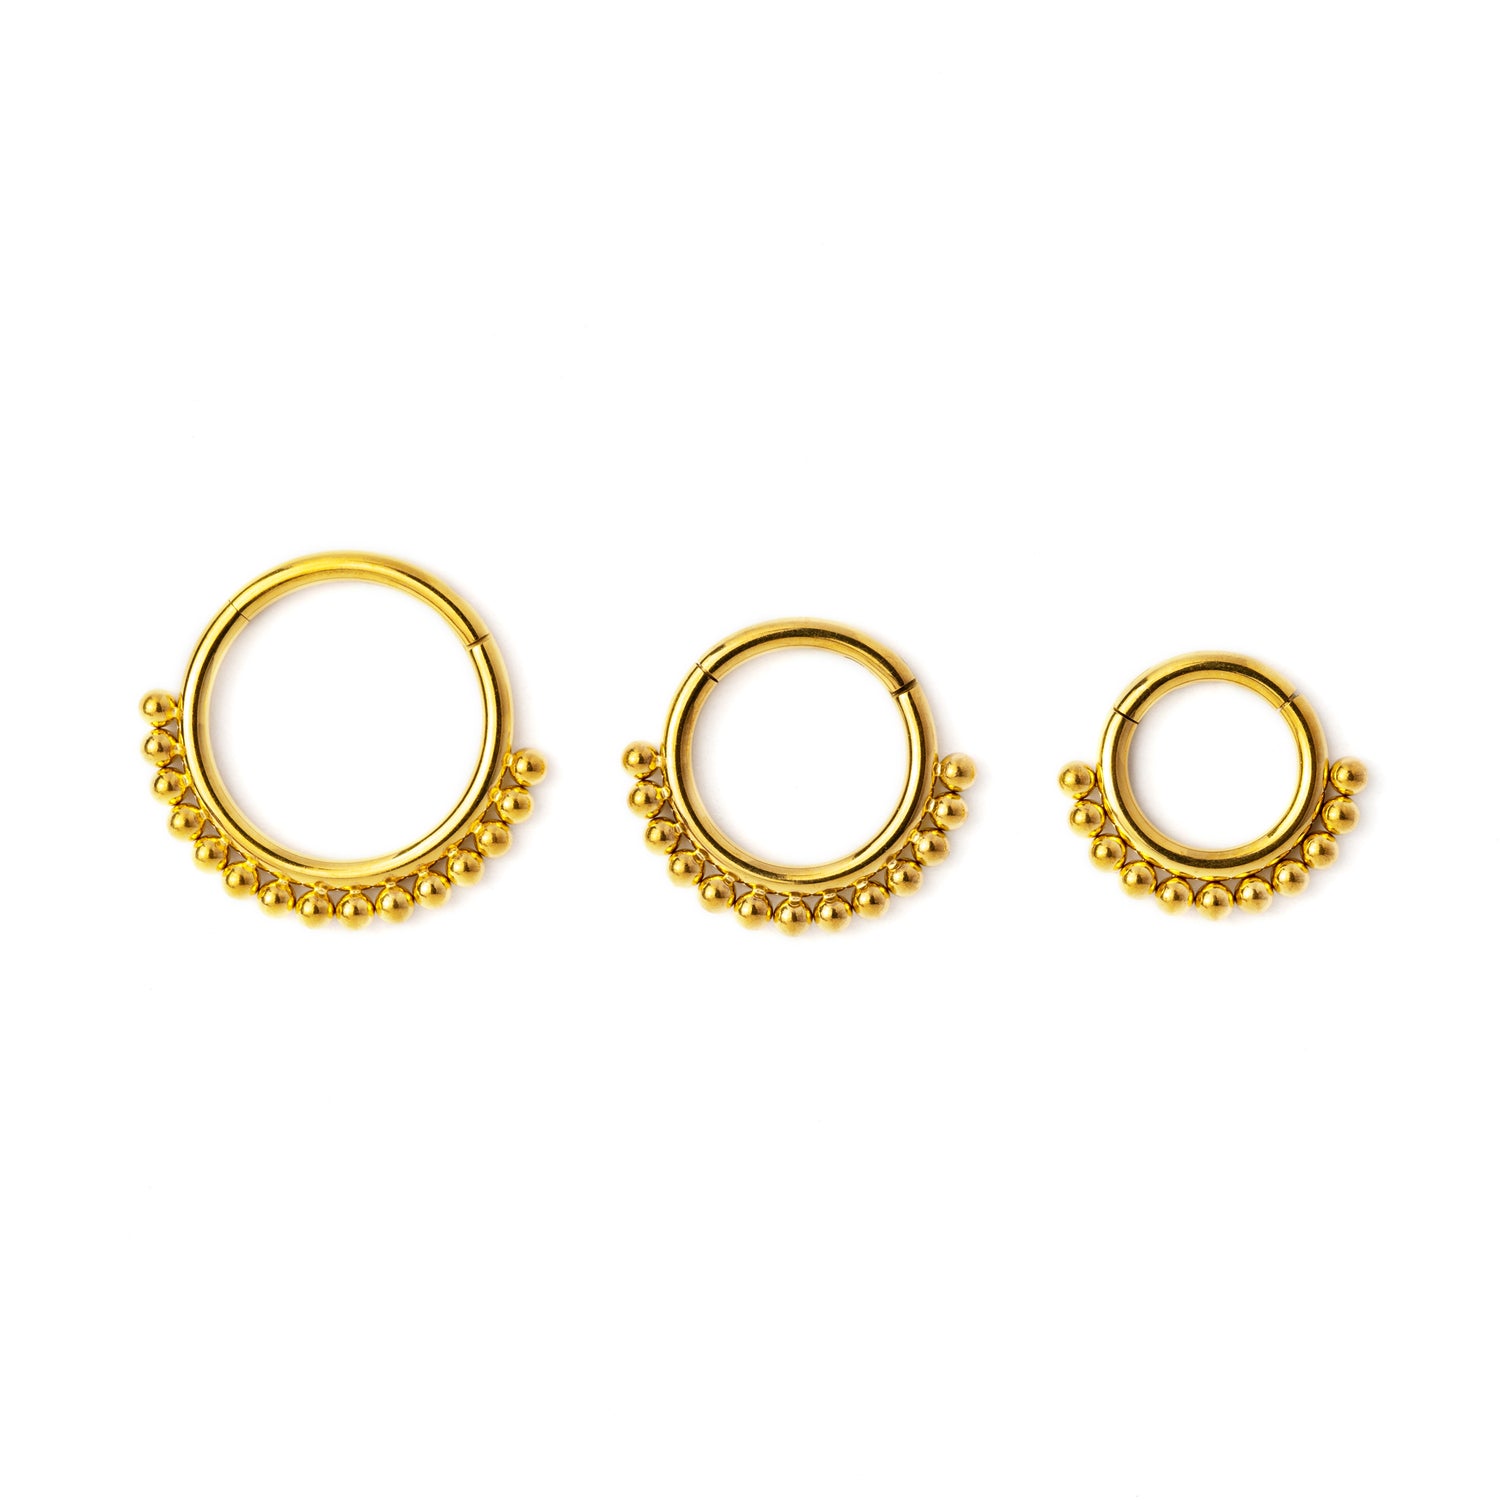 6mm, 8mm, 10mm Liya Gold surgical steel septum clicker rings frontal view